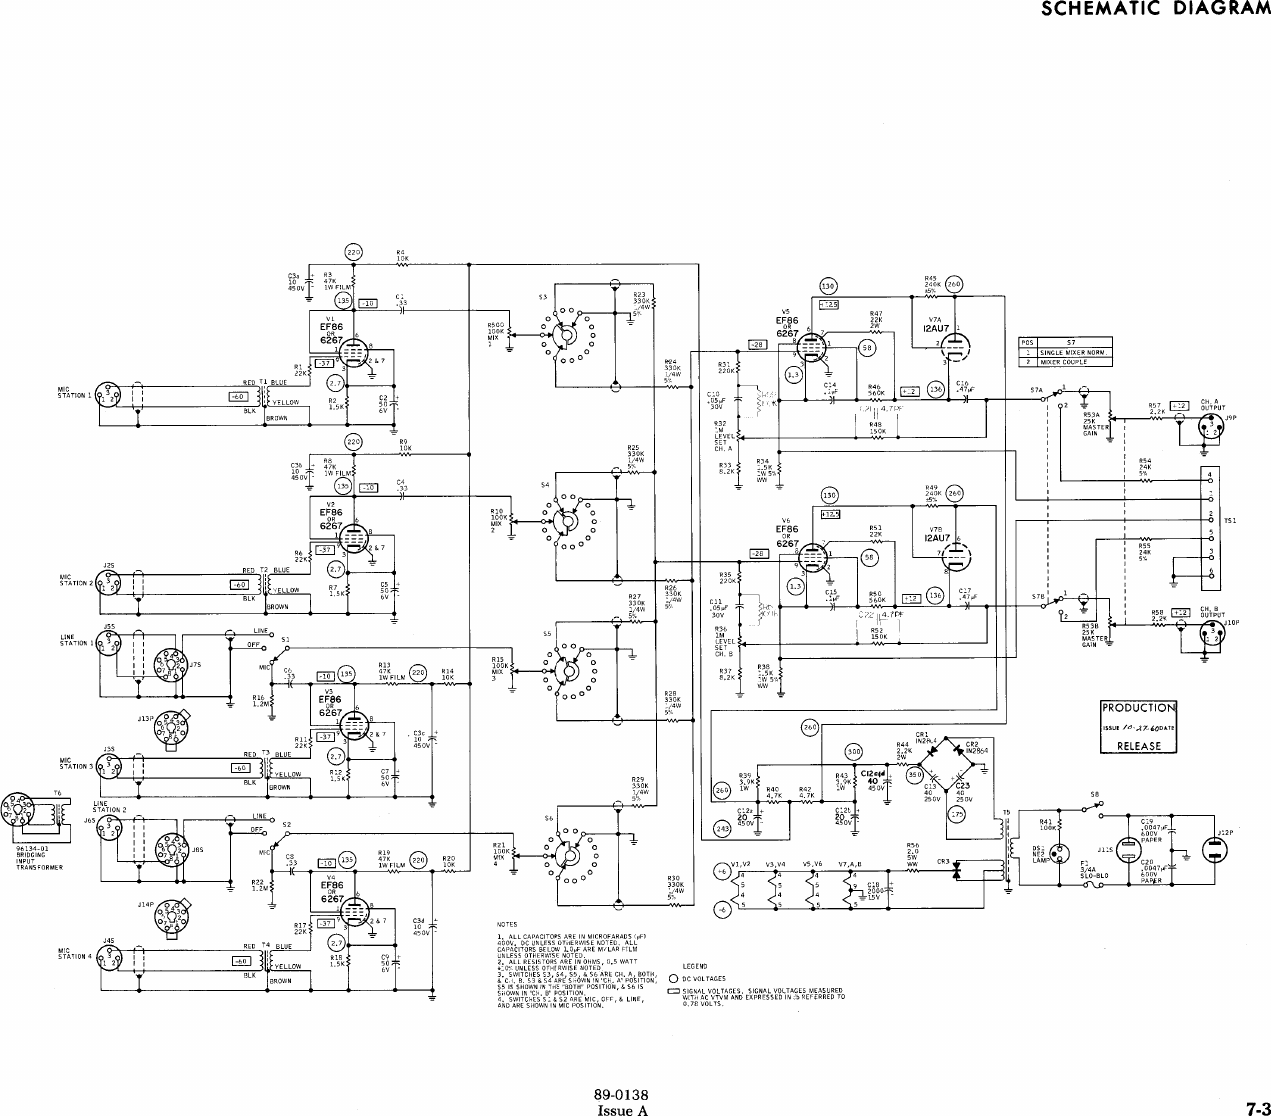 AmpexMX35schematic.1559924161-User-Guide-Page-1.png